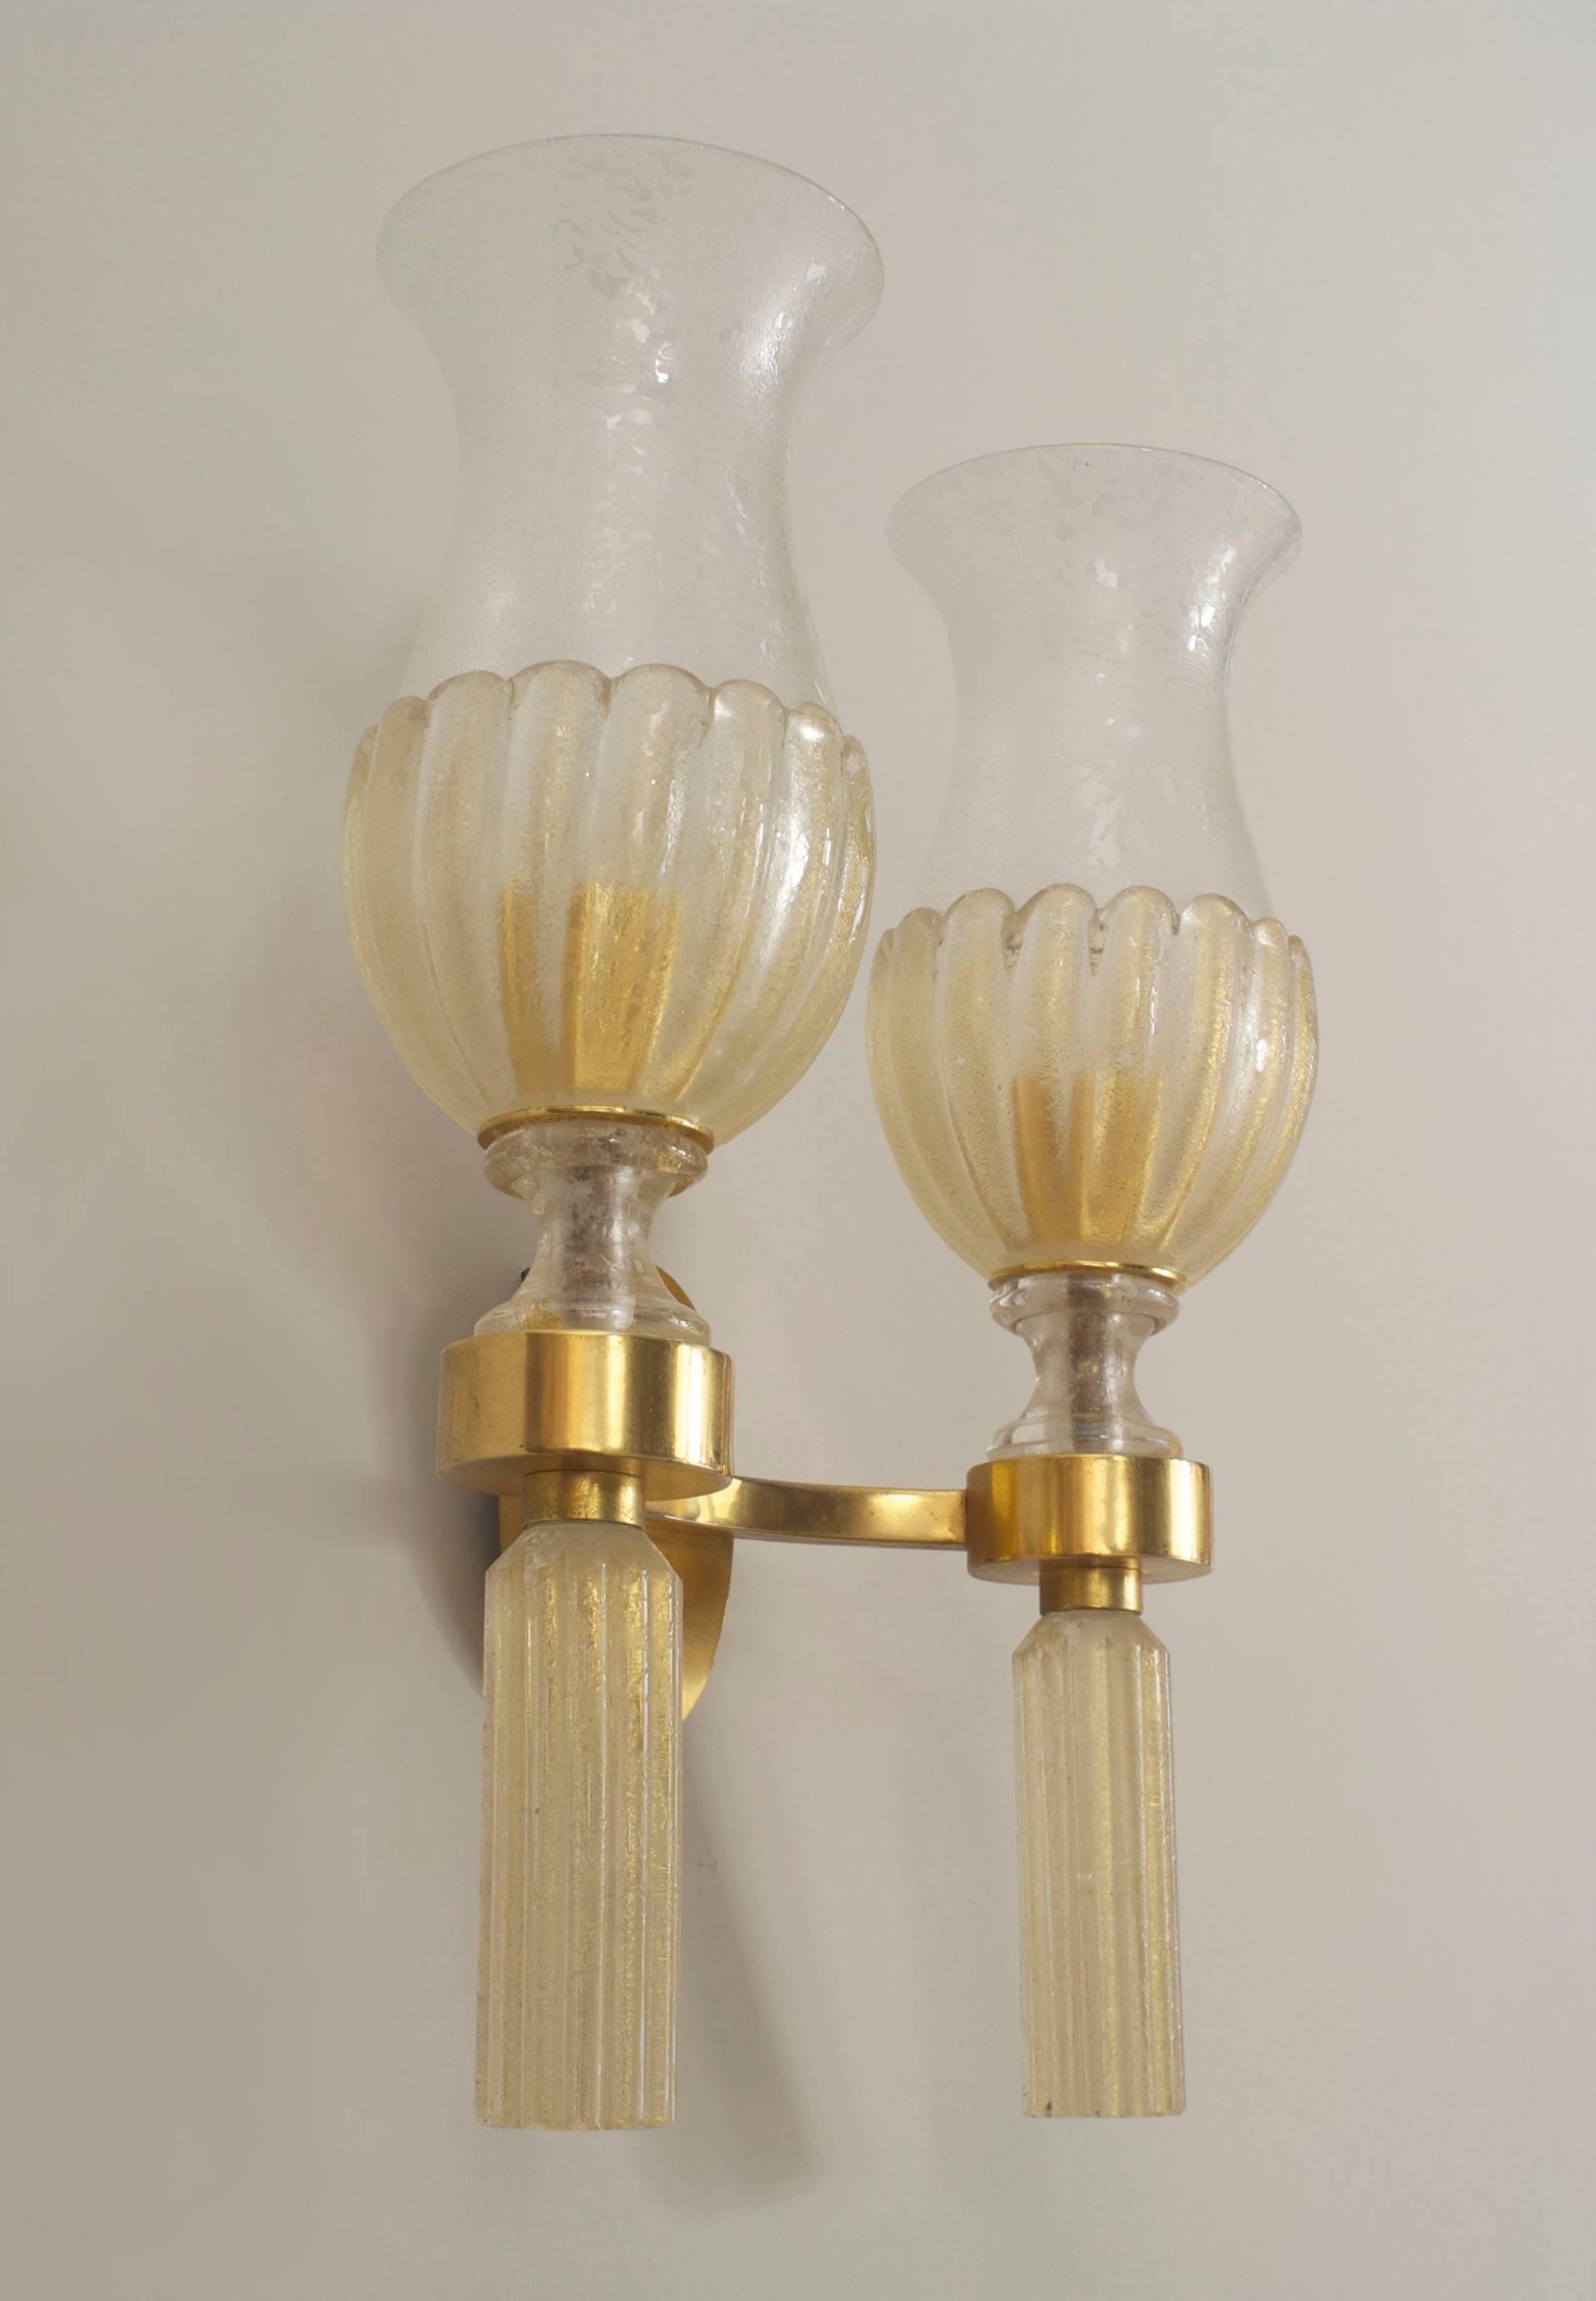 Pair of Italian Mid-Century (1940s) Venetian Murano gold dusted glass wall sconces supported by a gilt bronze two-arm frame holding shades with a fluted bottom above cylindrical fluted finals. (PRICED AS Pair)
